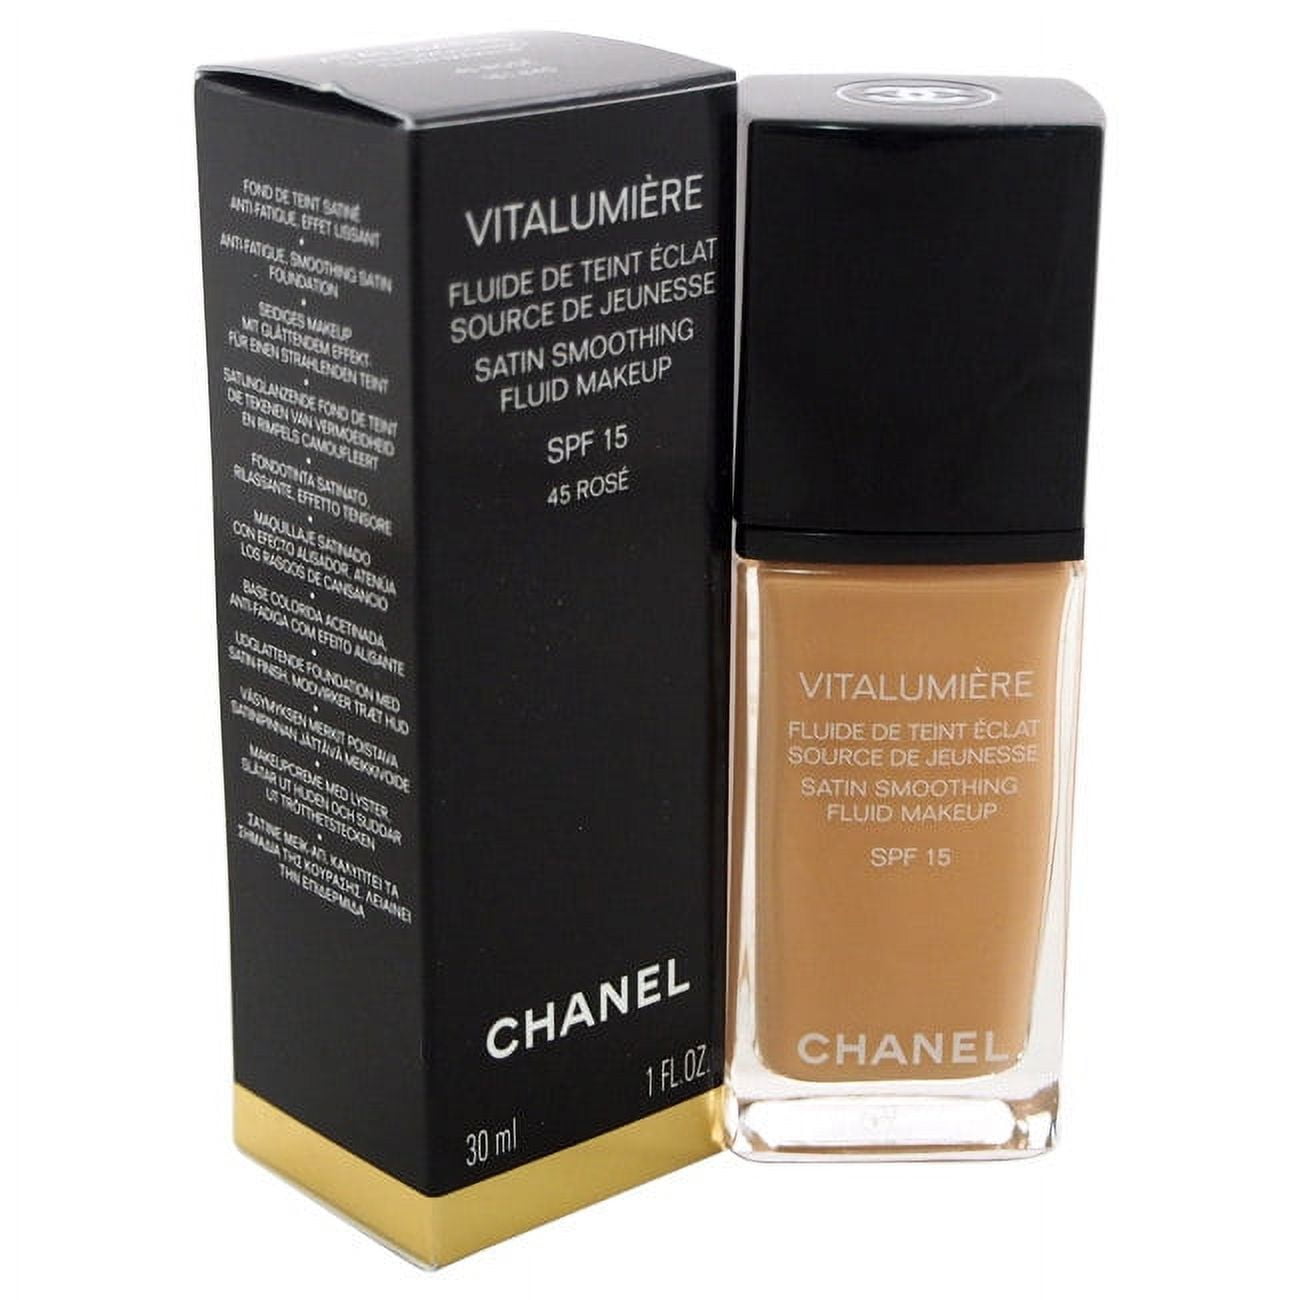 Chanel Vitalumiere Radiant Moisture Rich Fluid Foundation 30ml/1oz buy in  United States with free shipping CosmoStore